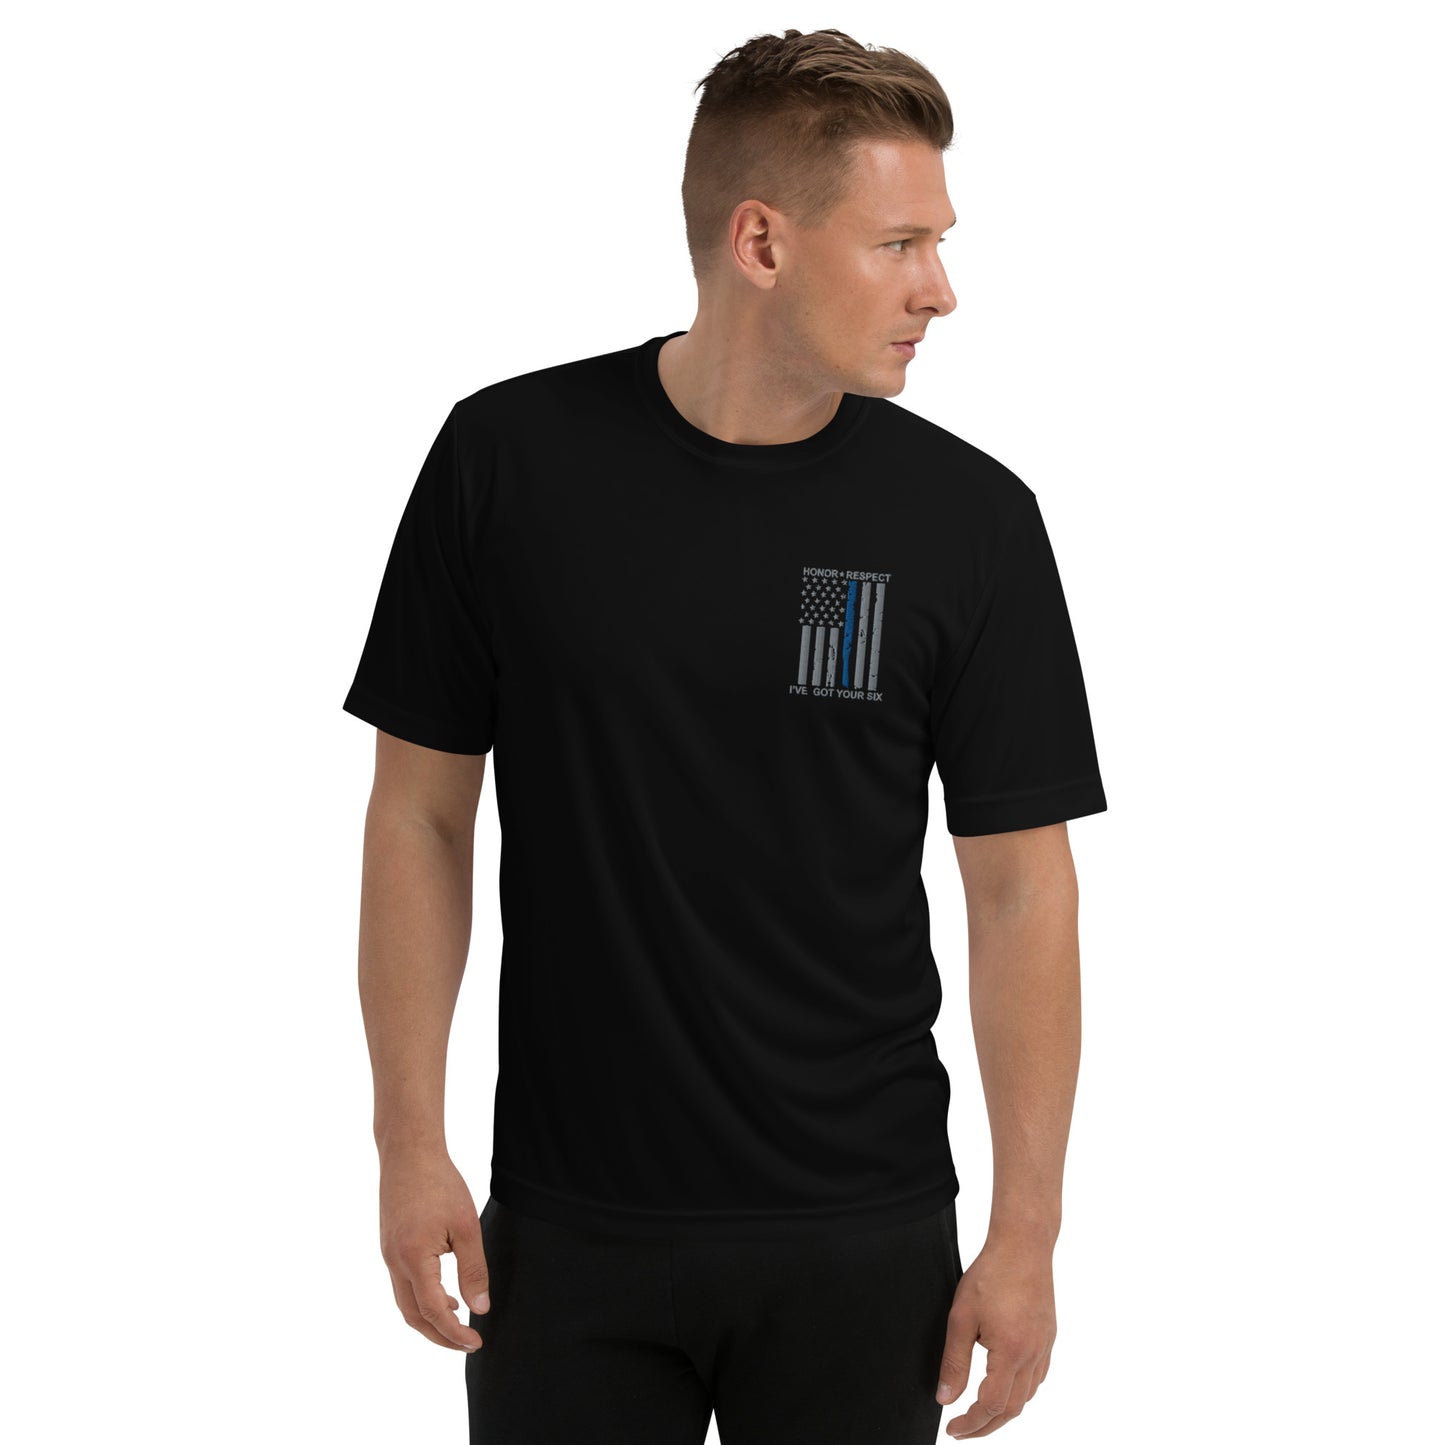 Honor And Respect, I've Got Your Six Sport Tec Moisture Wicking T Shirt